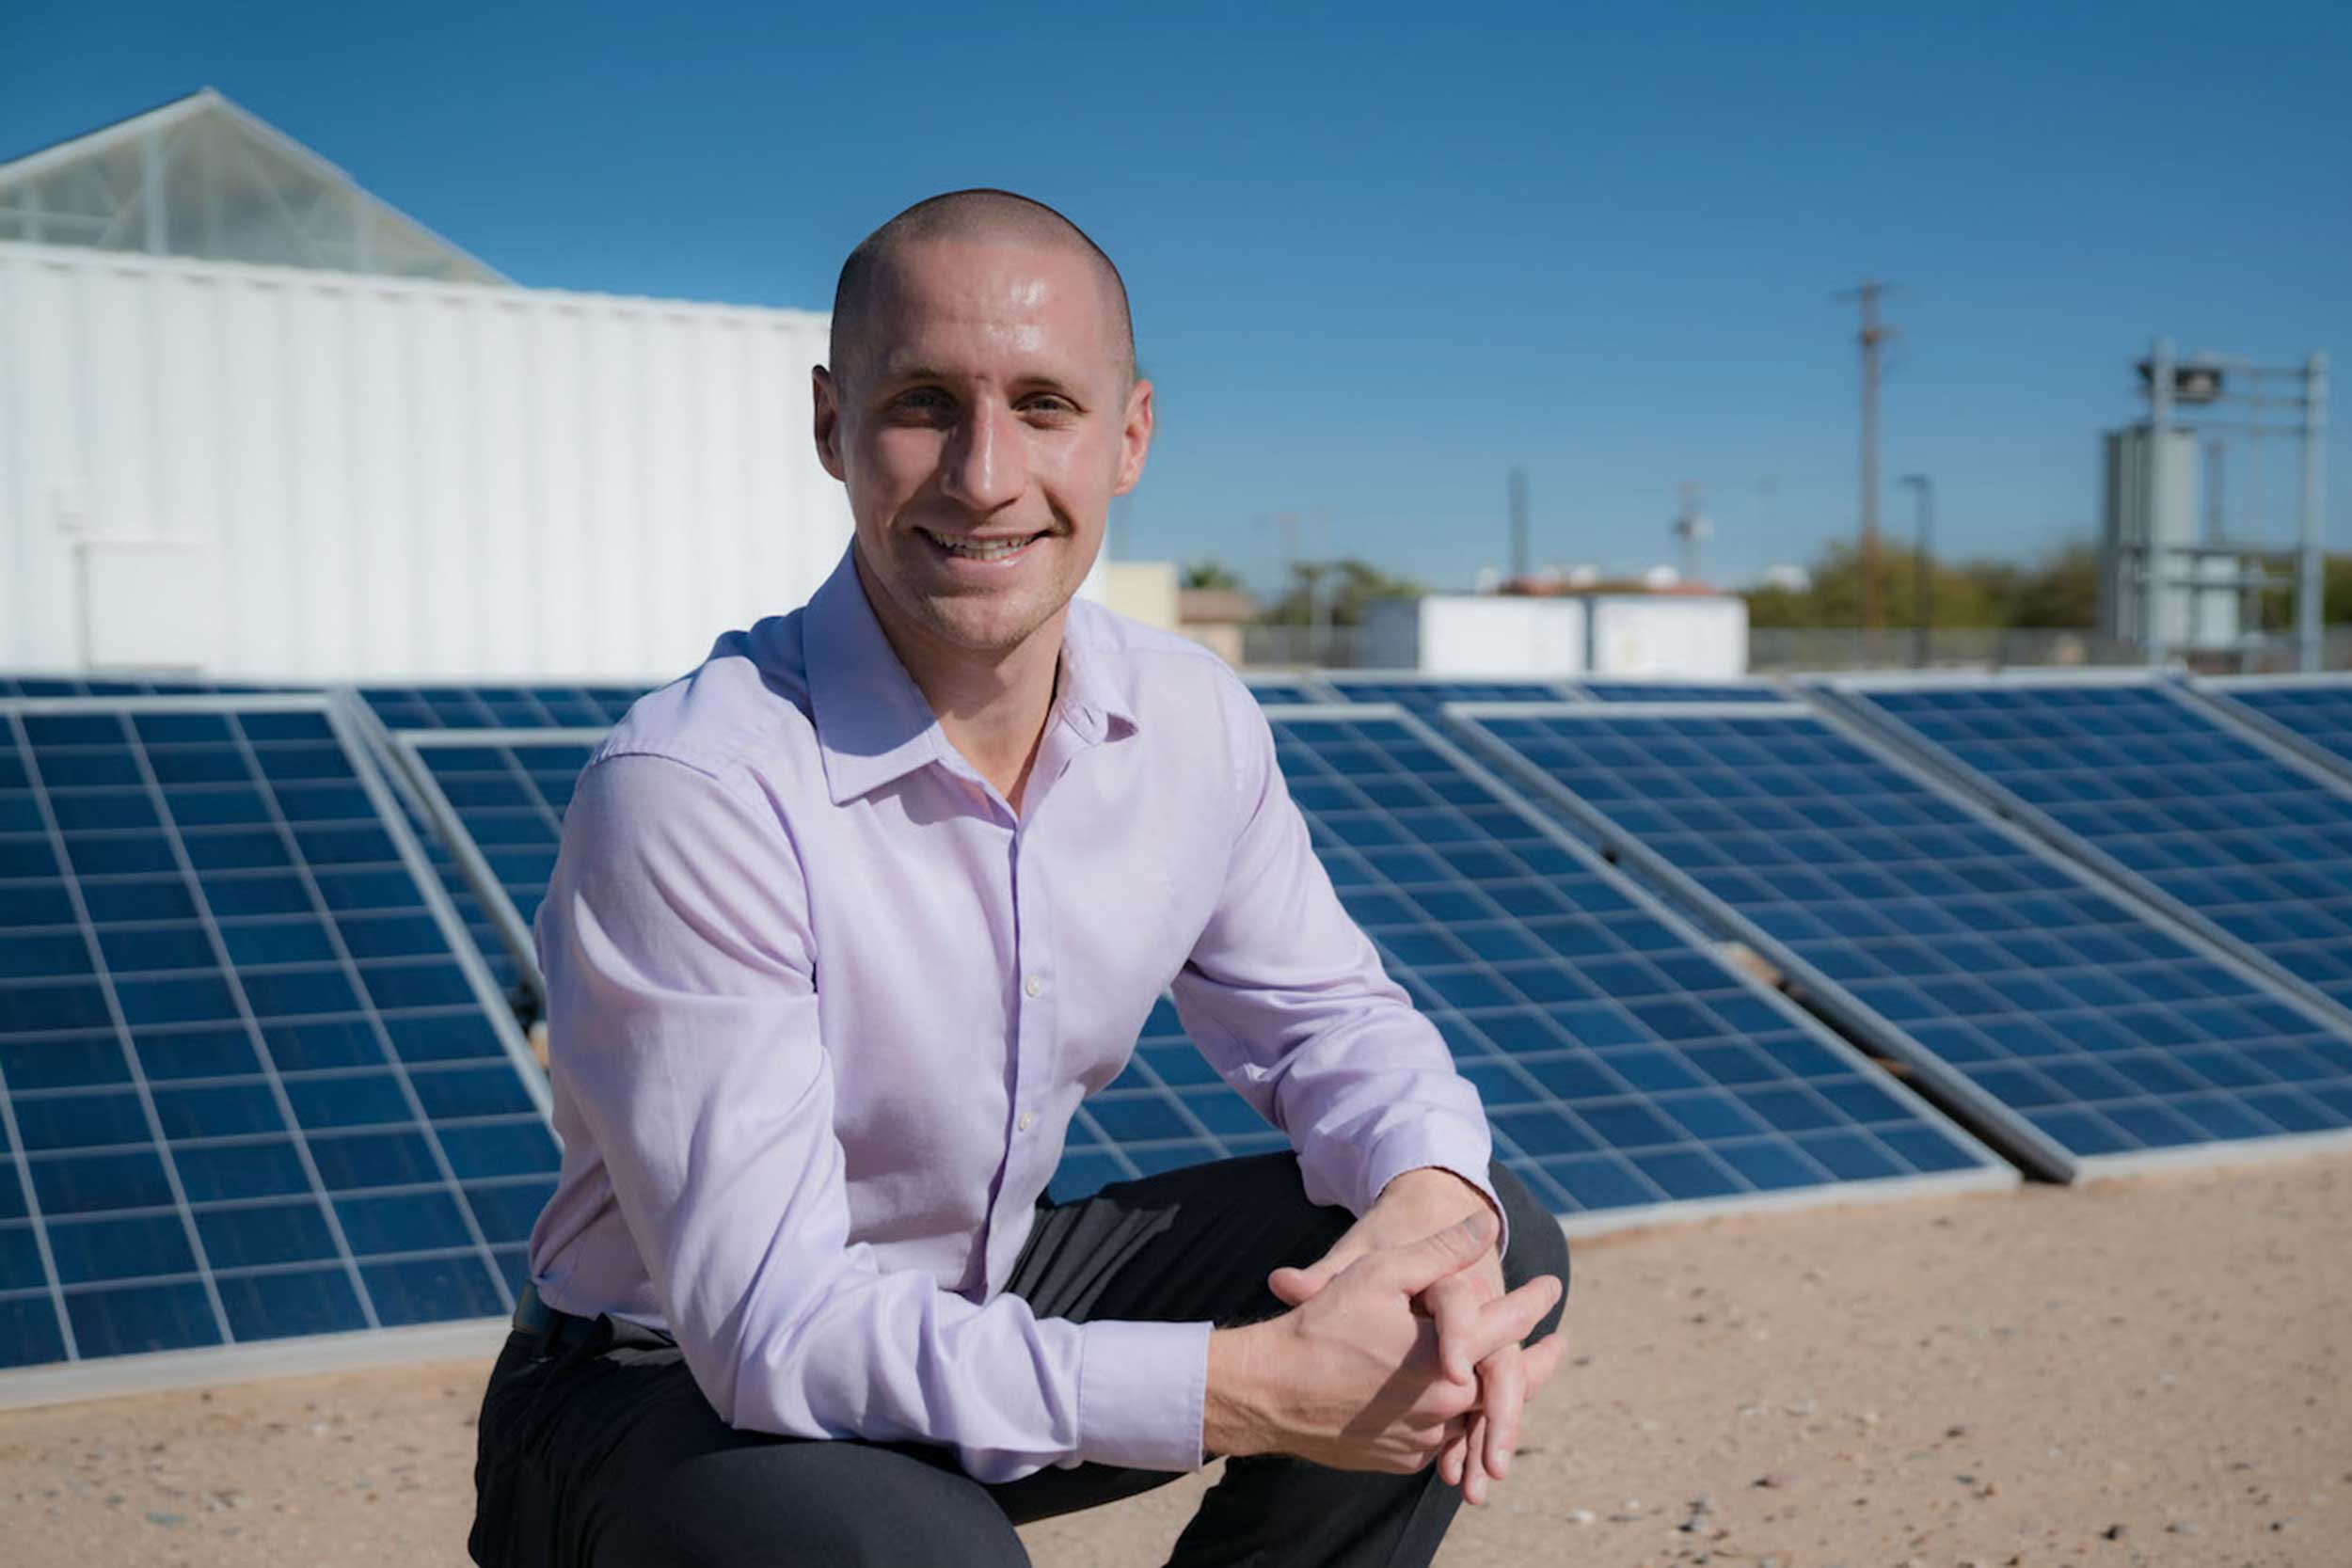 Portrait of Dr. Nathan Johnson outdoors near an array of solar panels